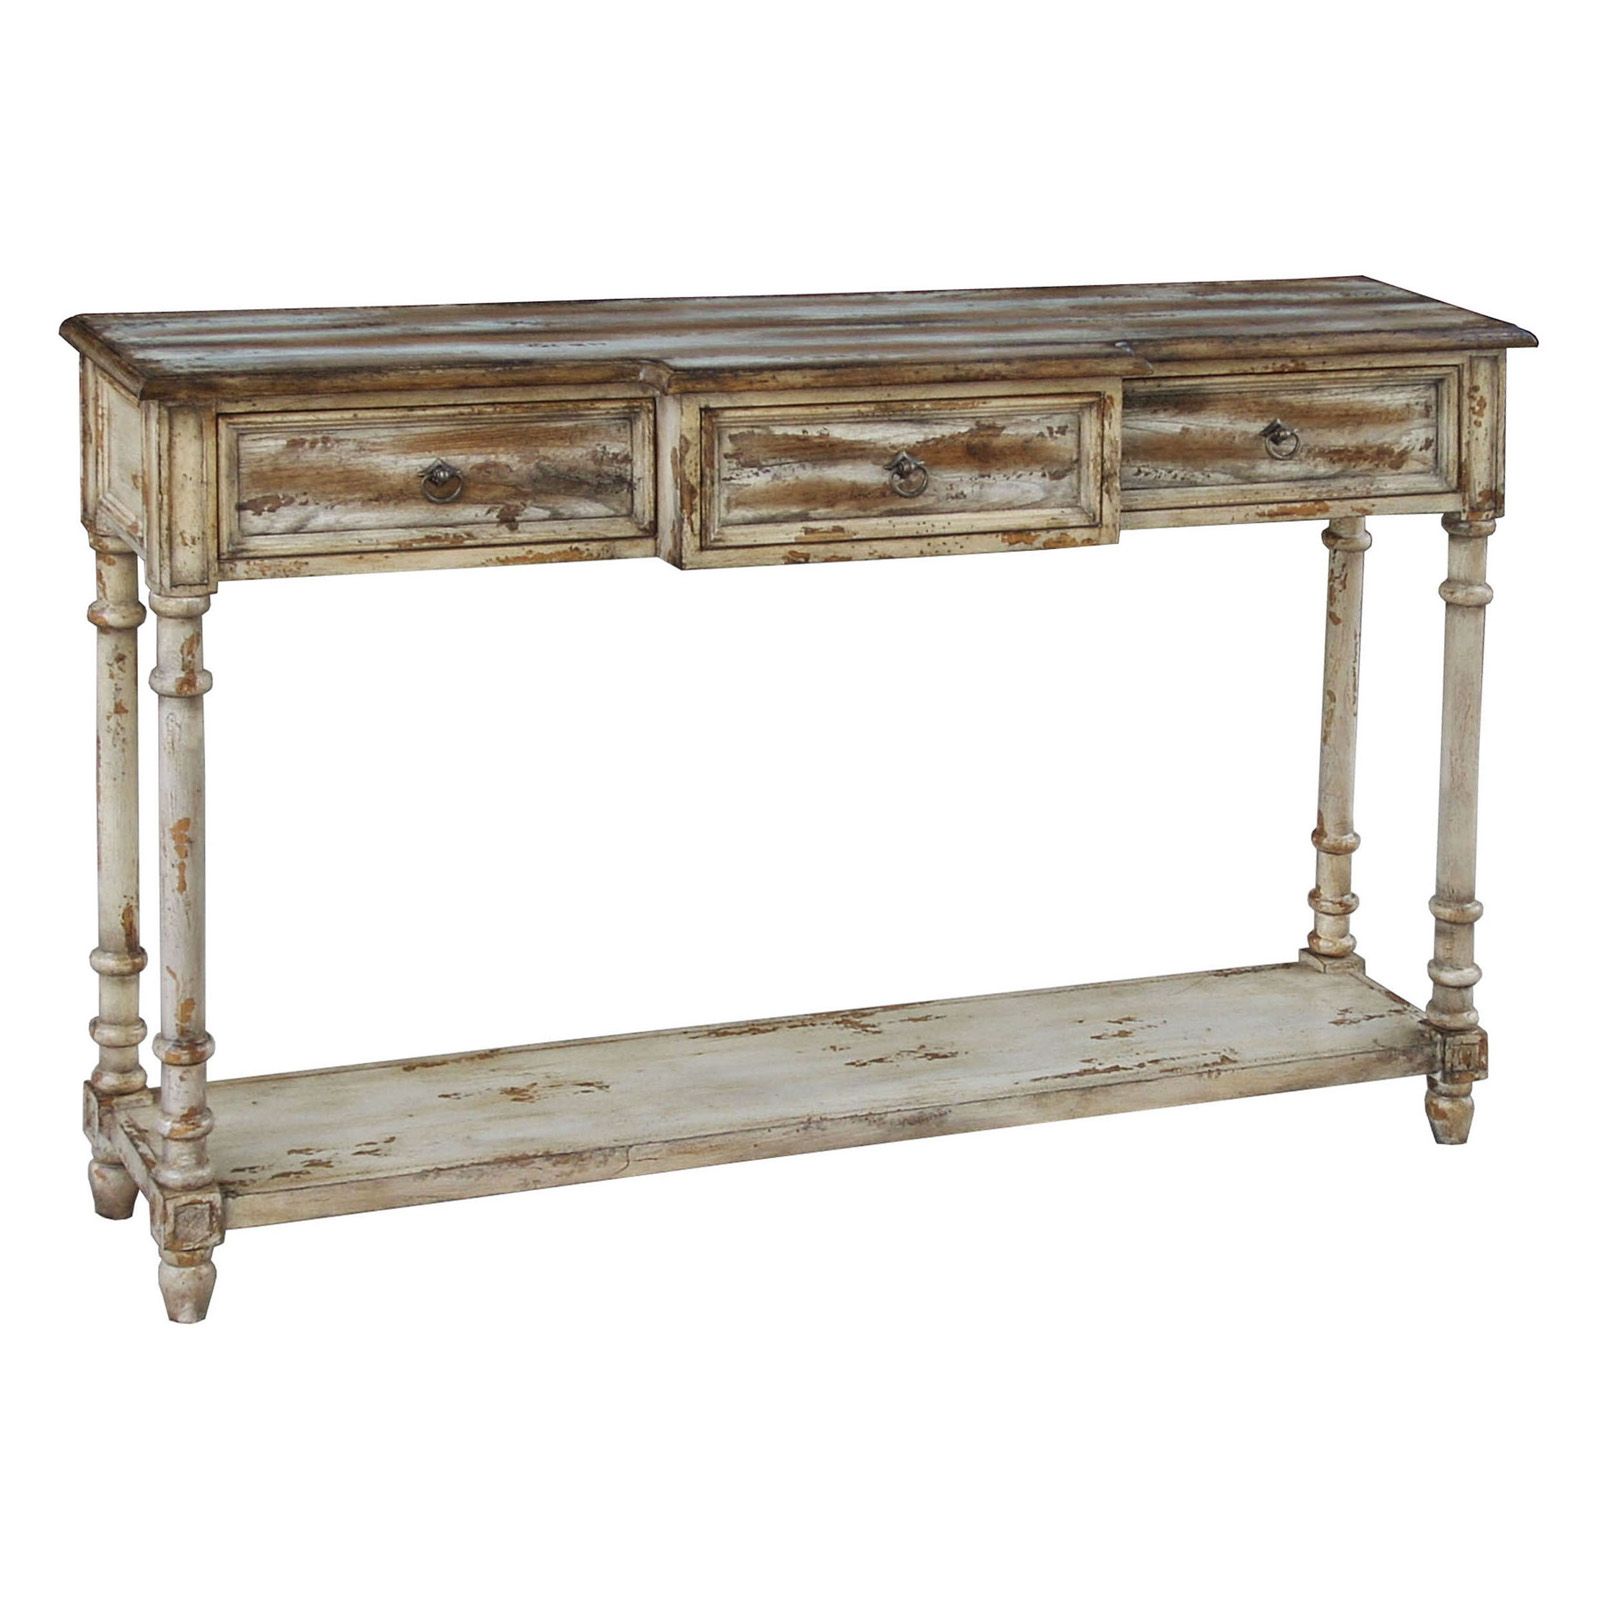 Pulaski Accents Rustic Chic Console – Juliet – Console Tables At Hayneedle In Square Weathered White Wood Console Tables (Gallery 19 of 20)